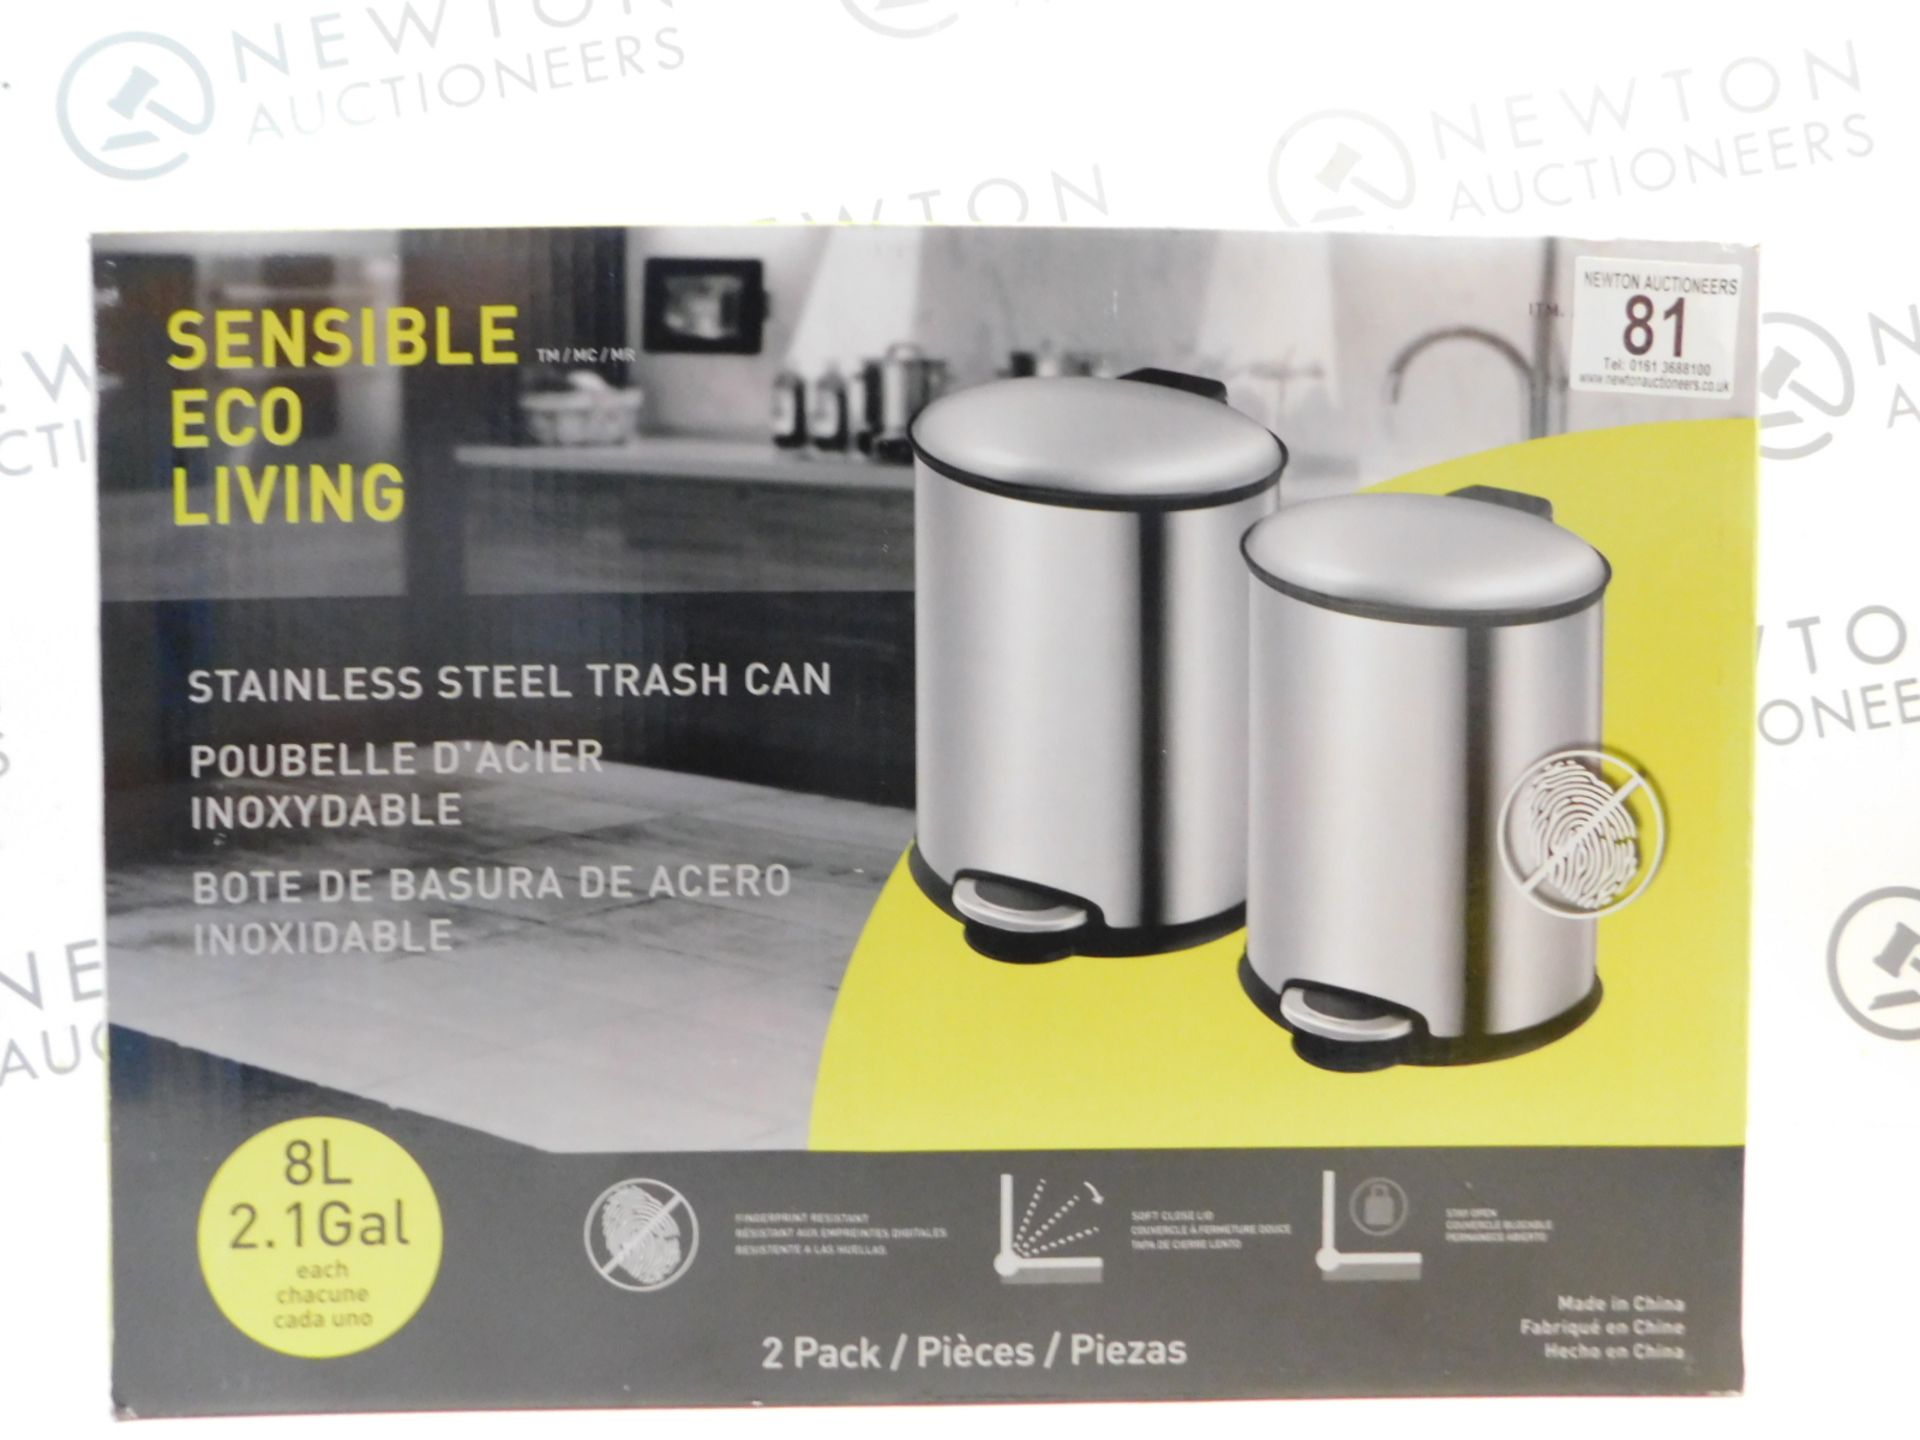 1 BOXED SET OF 2 SENSIBLE ECO LIVING STAINLESS STEEL PEDAL BINS RRP Â£39.99